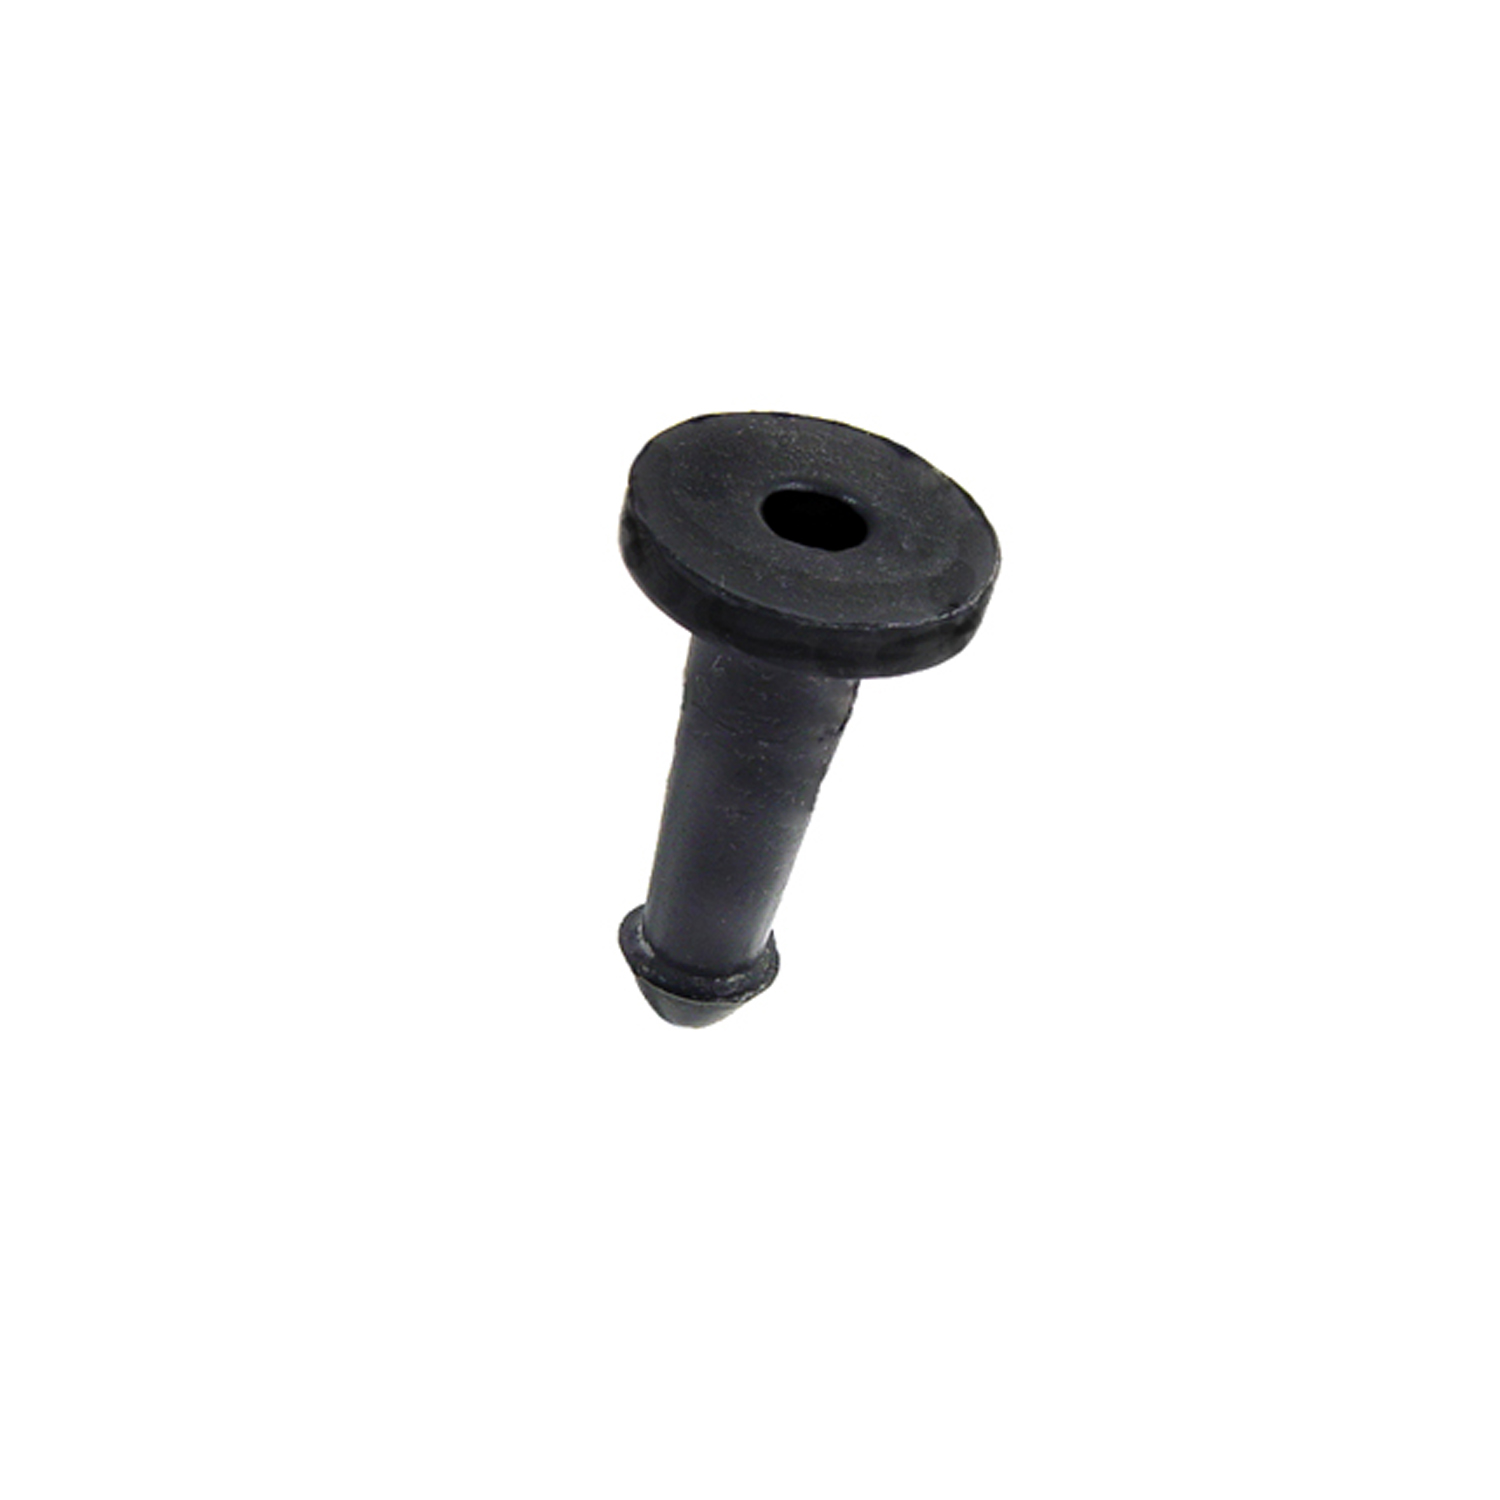 1974 Dodge Charger Firewall to Dash Insulation Fastener.  Made of black rubber-SM 80-B